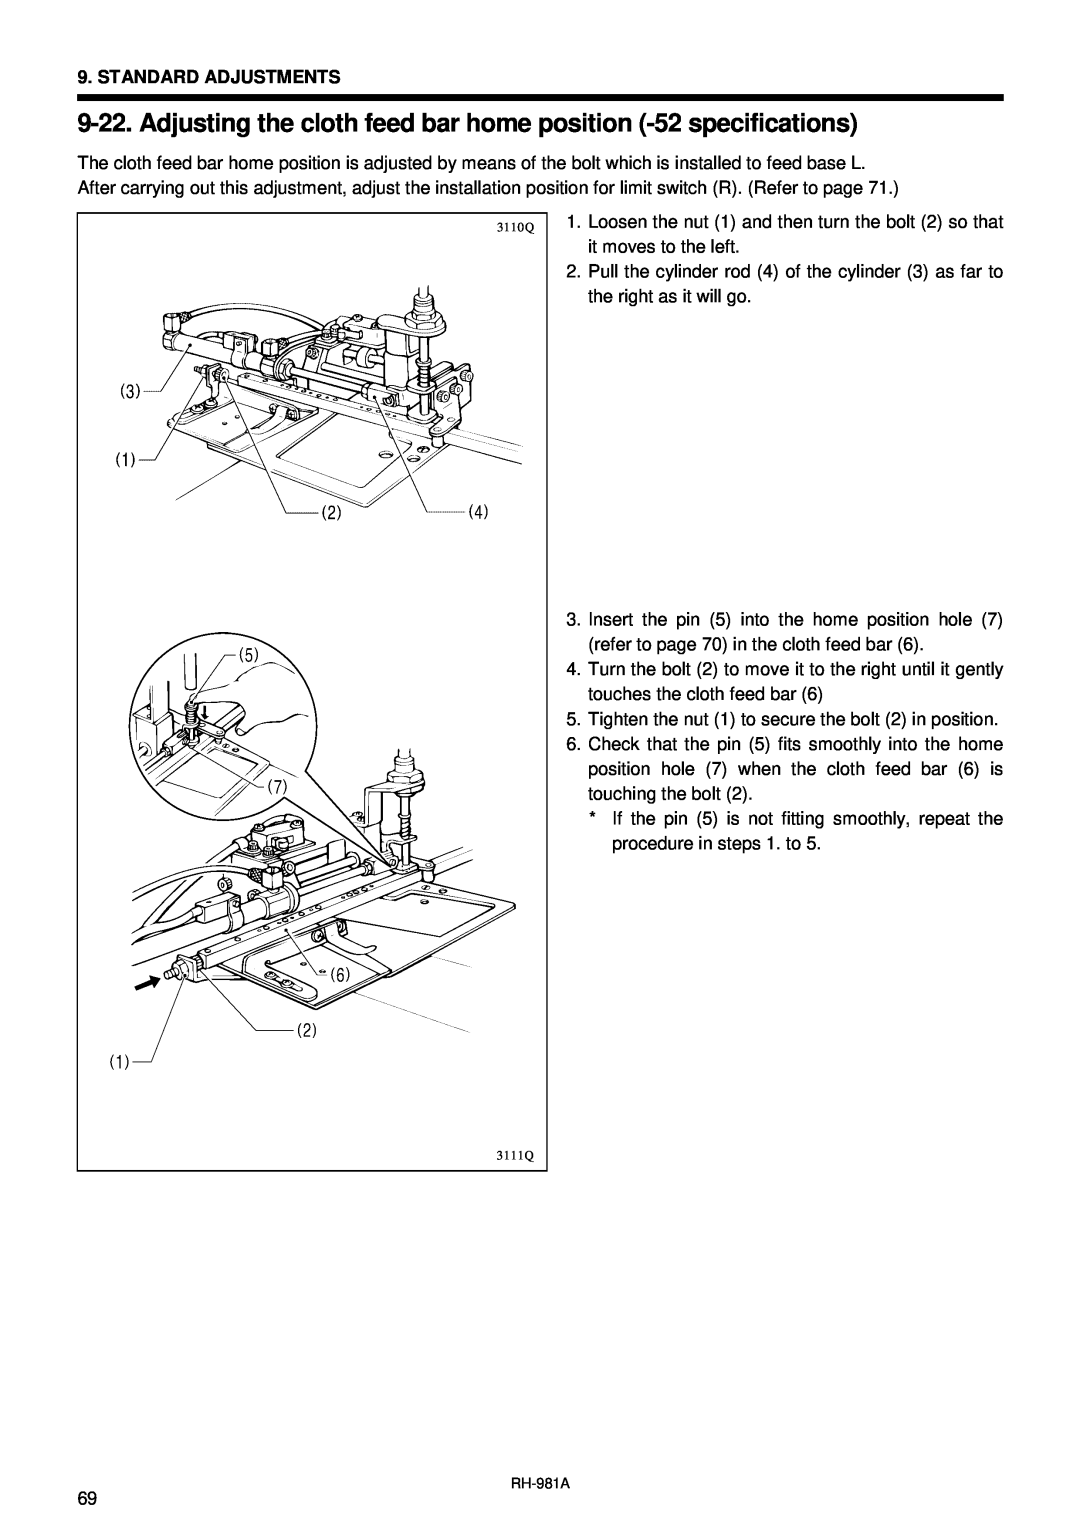 Brother rh-918a manual Adjusting the cloth feed bar home position -52 specifications 